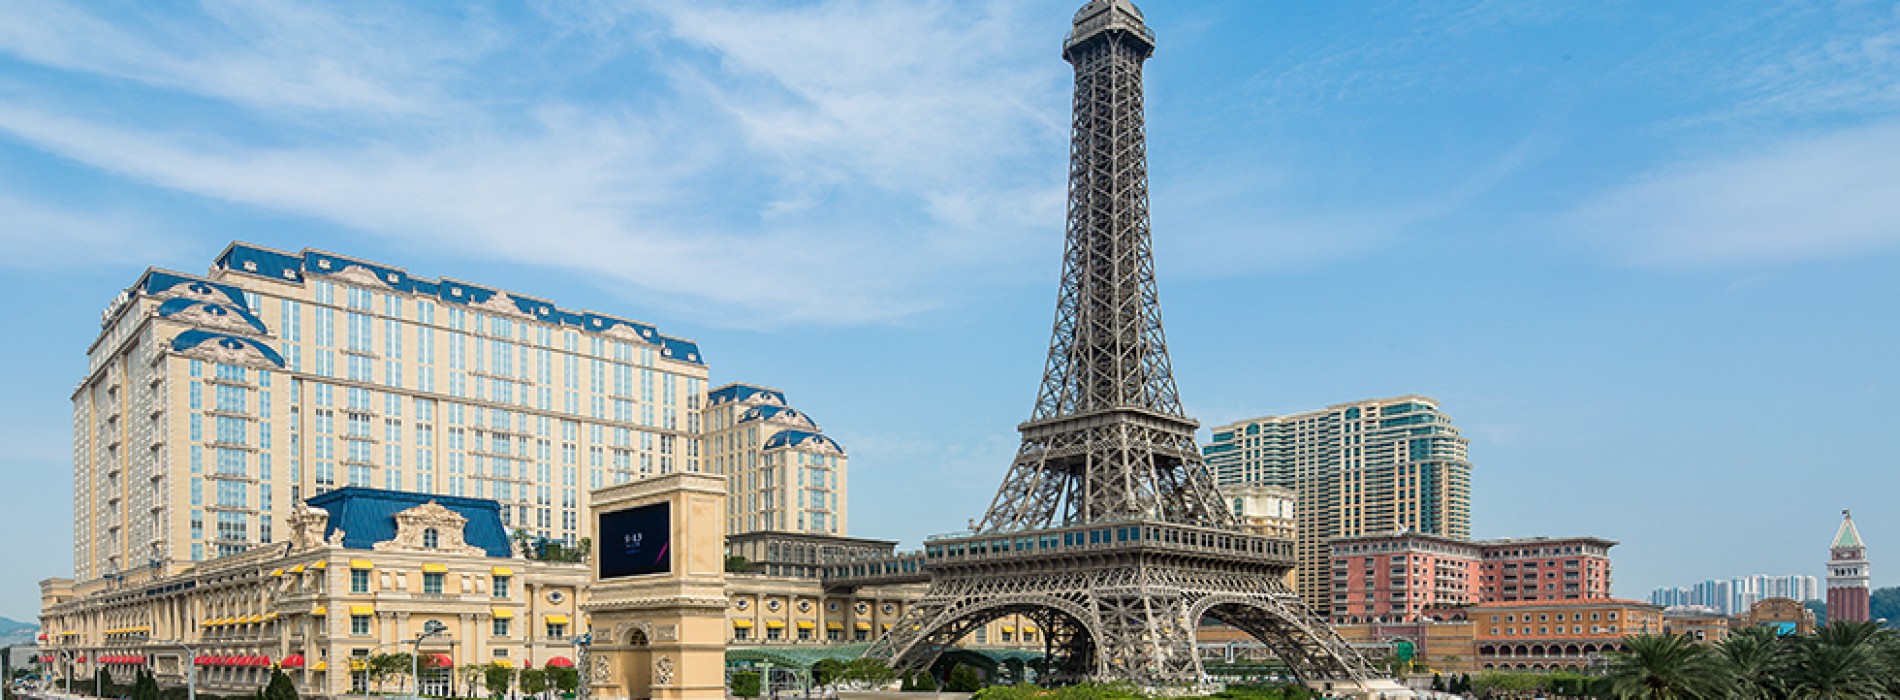 Enjoy spectacular Eiffel Tower views and Dining Sensations with up to 25% Savings at The Parisian Macao